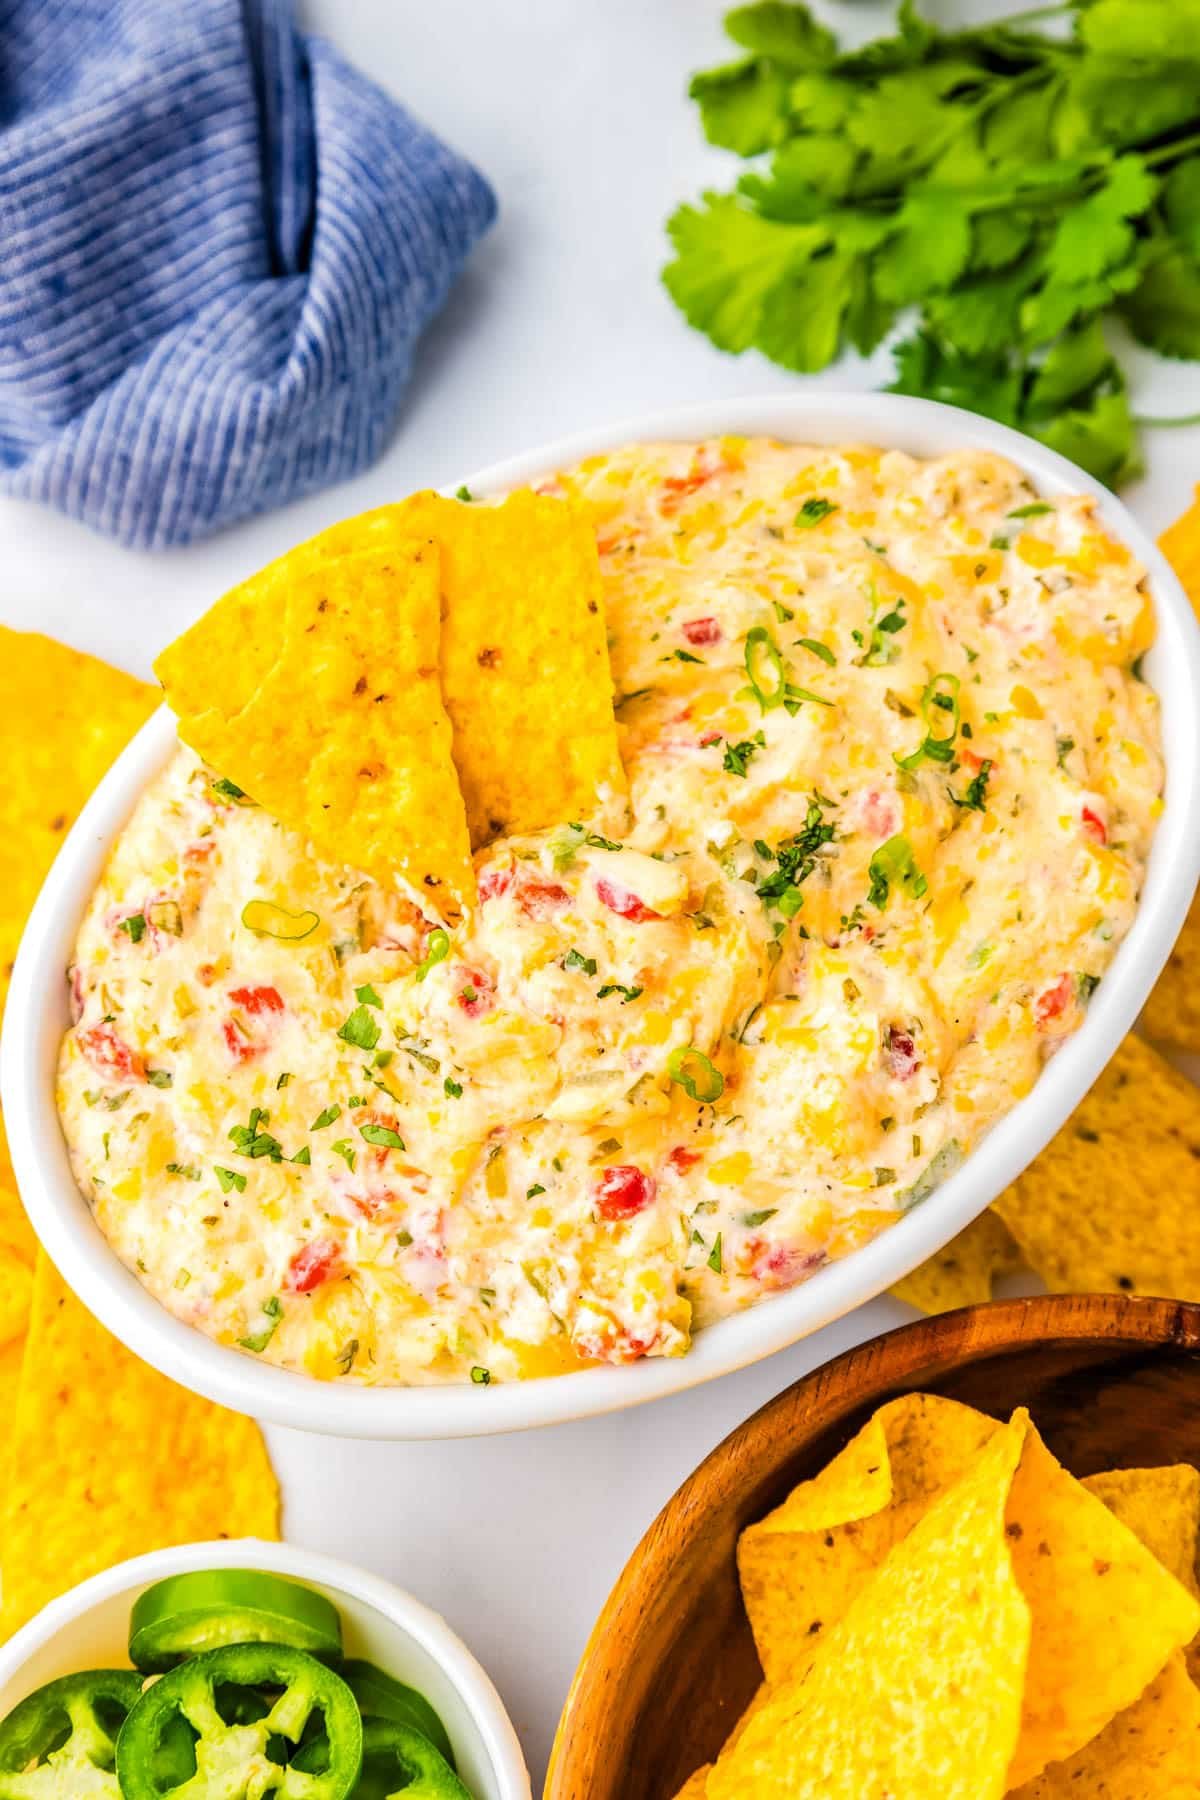 The Hot Pimento Cheese Dip in a serving dish.